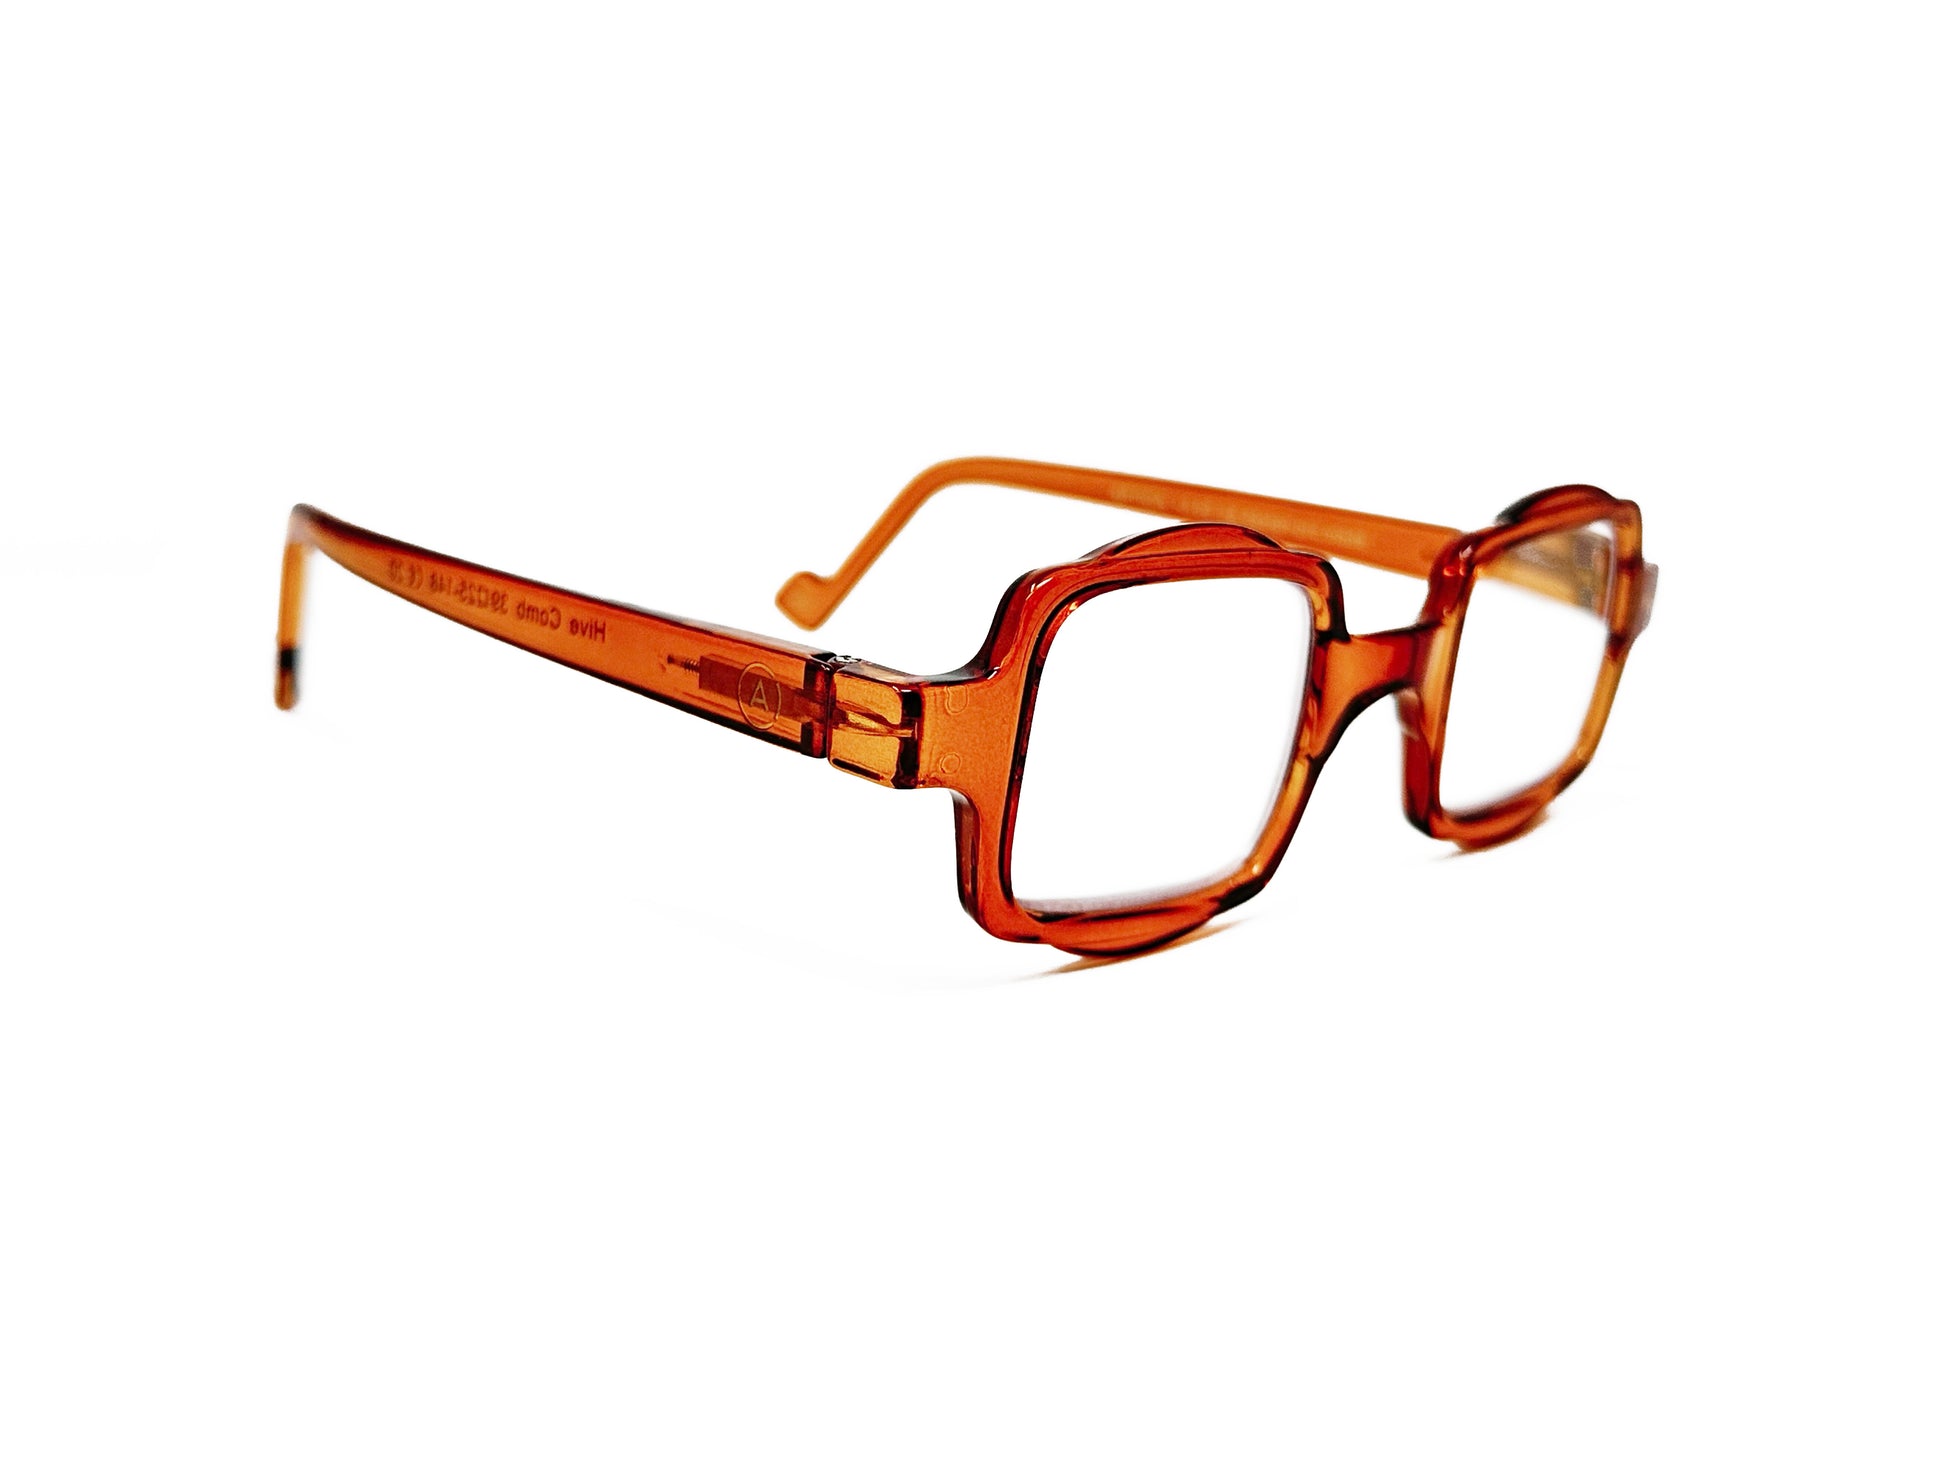 Aptica square reading glass with half-circle shape on top and bottom . Model: Hive. Color: Sticky Honey - Honey orange, Semi-transparent. Side view.